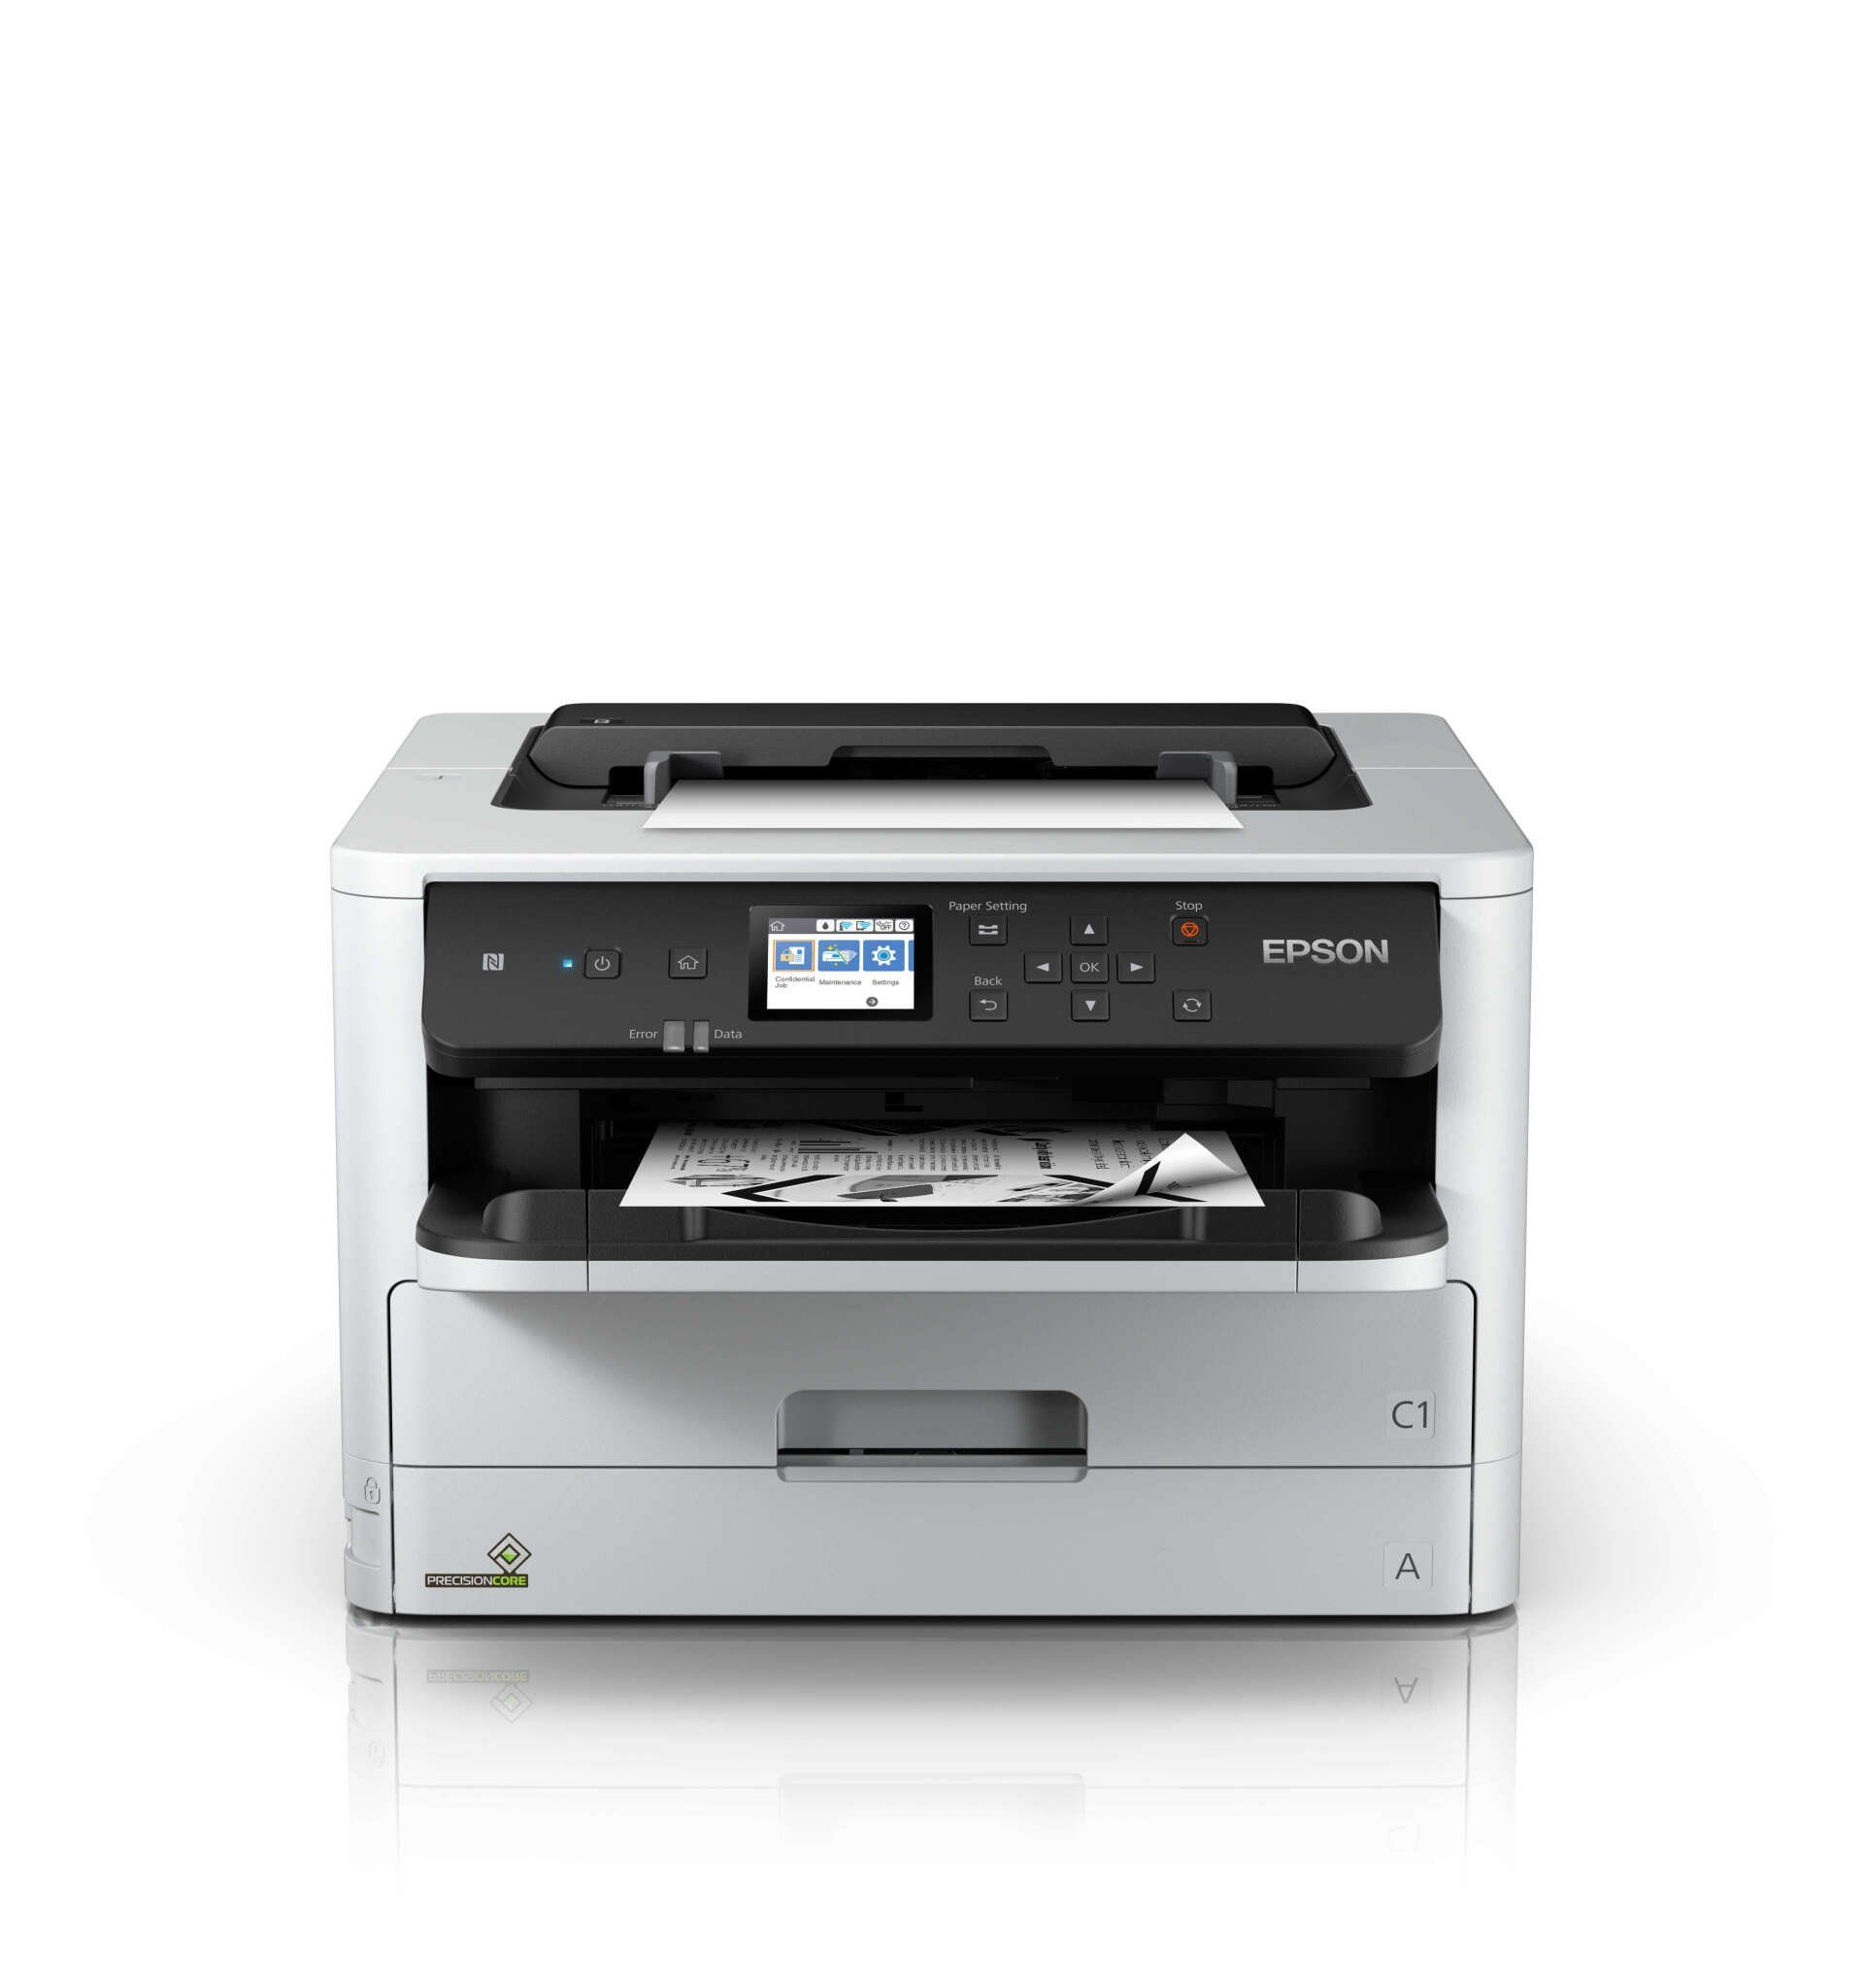 Rent this Epson small copier suitable for your small business on Month-to-Month basis.
